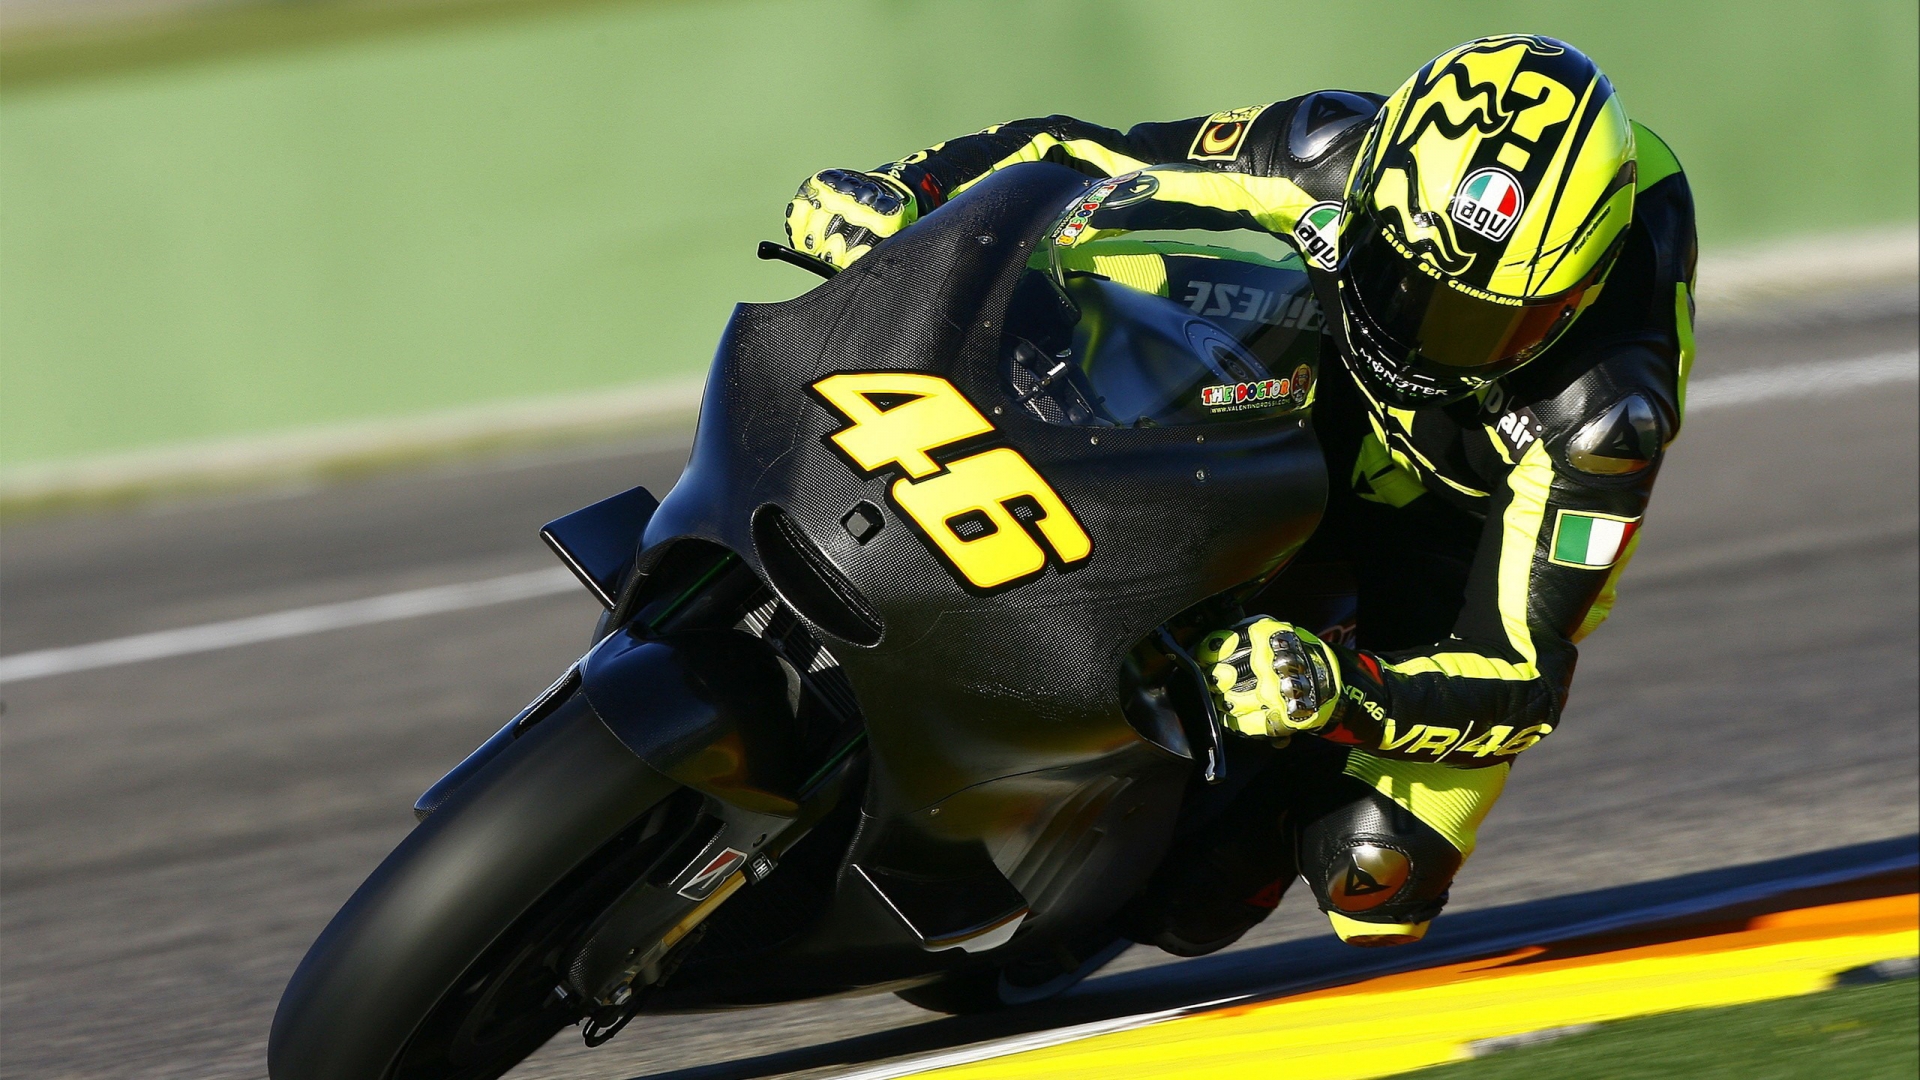 VR46 Racing for 1920 x 1080 HDTV 1080p resolution